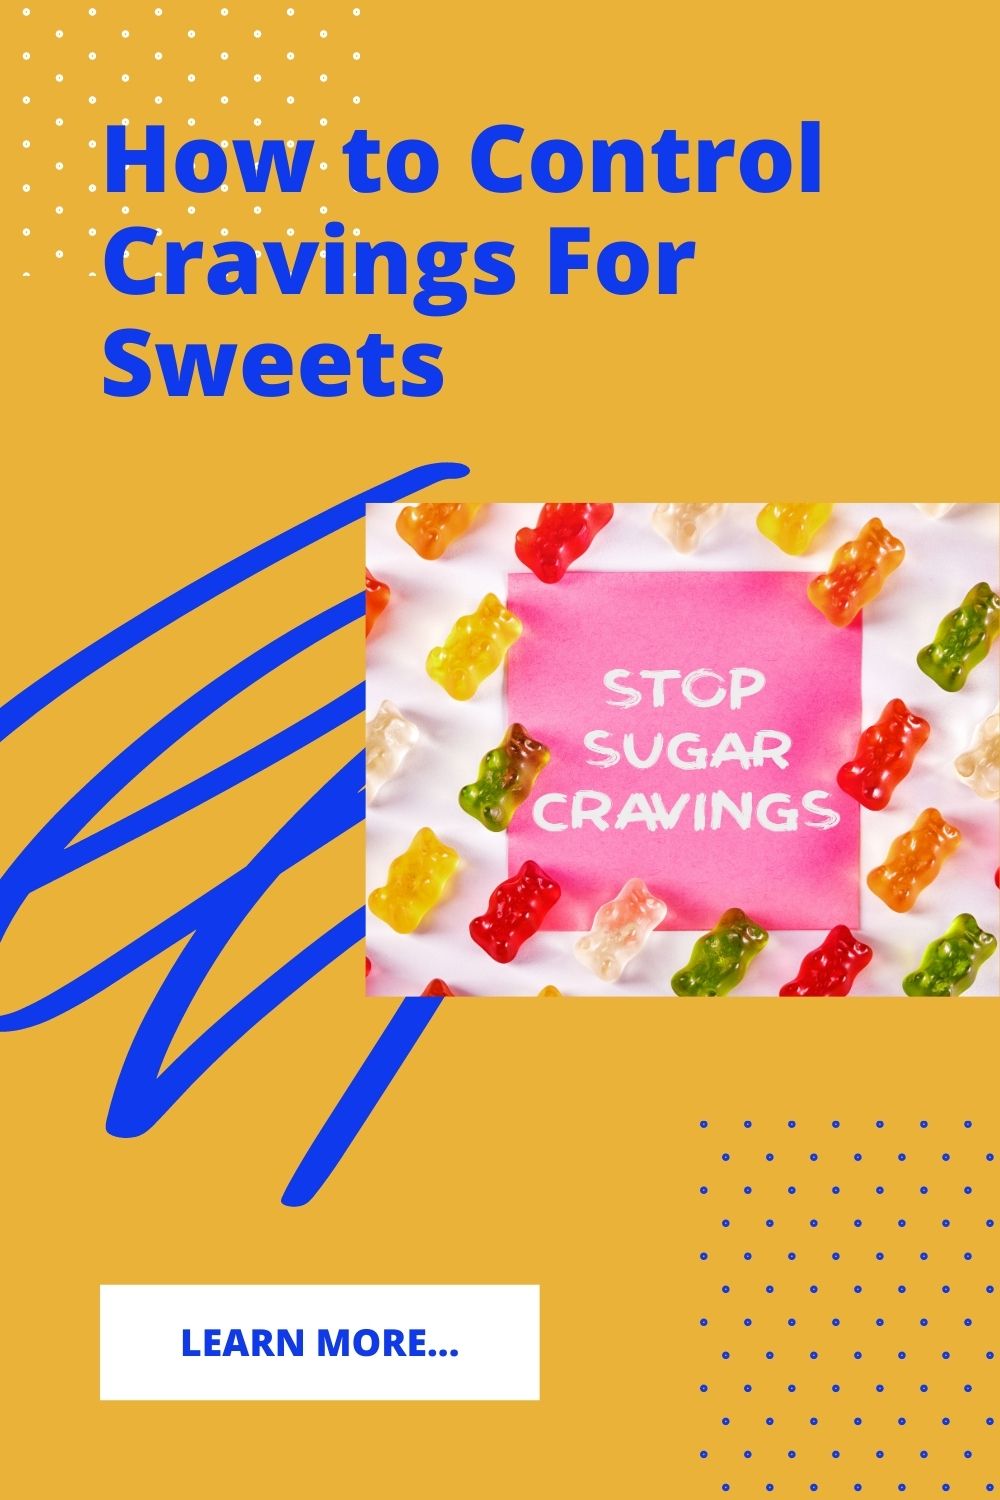 How To Control Cravings For Sweets